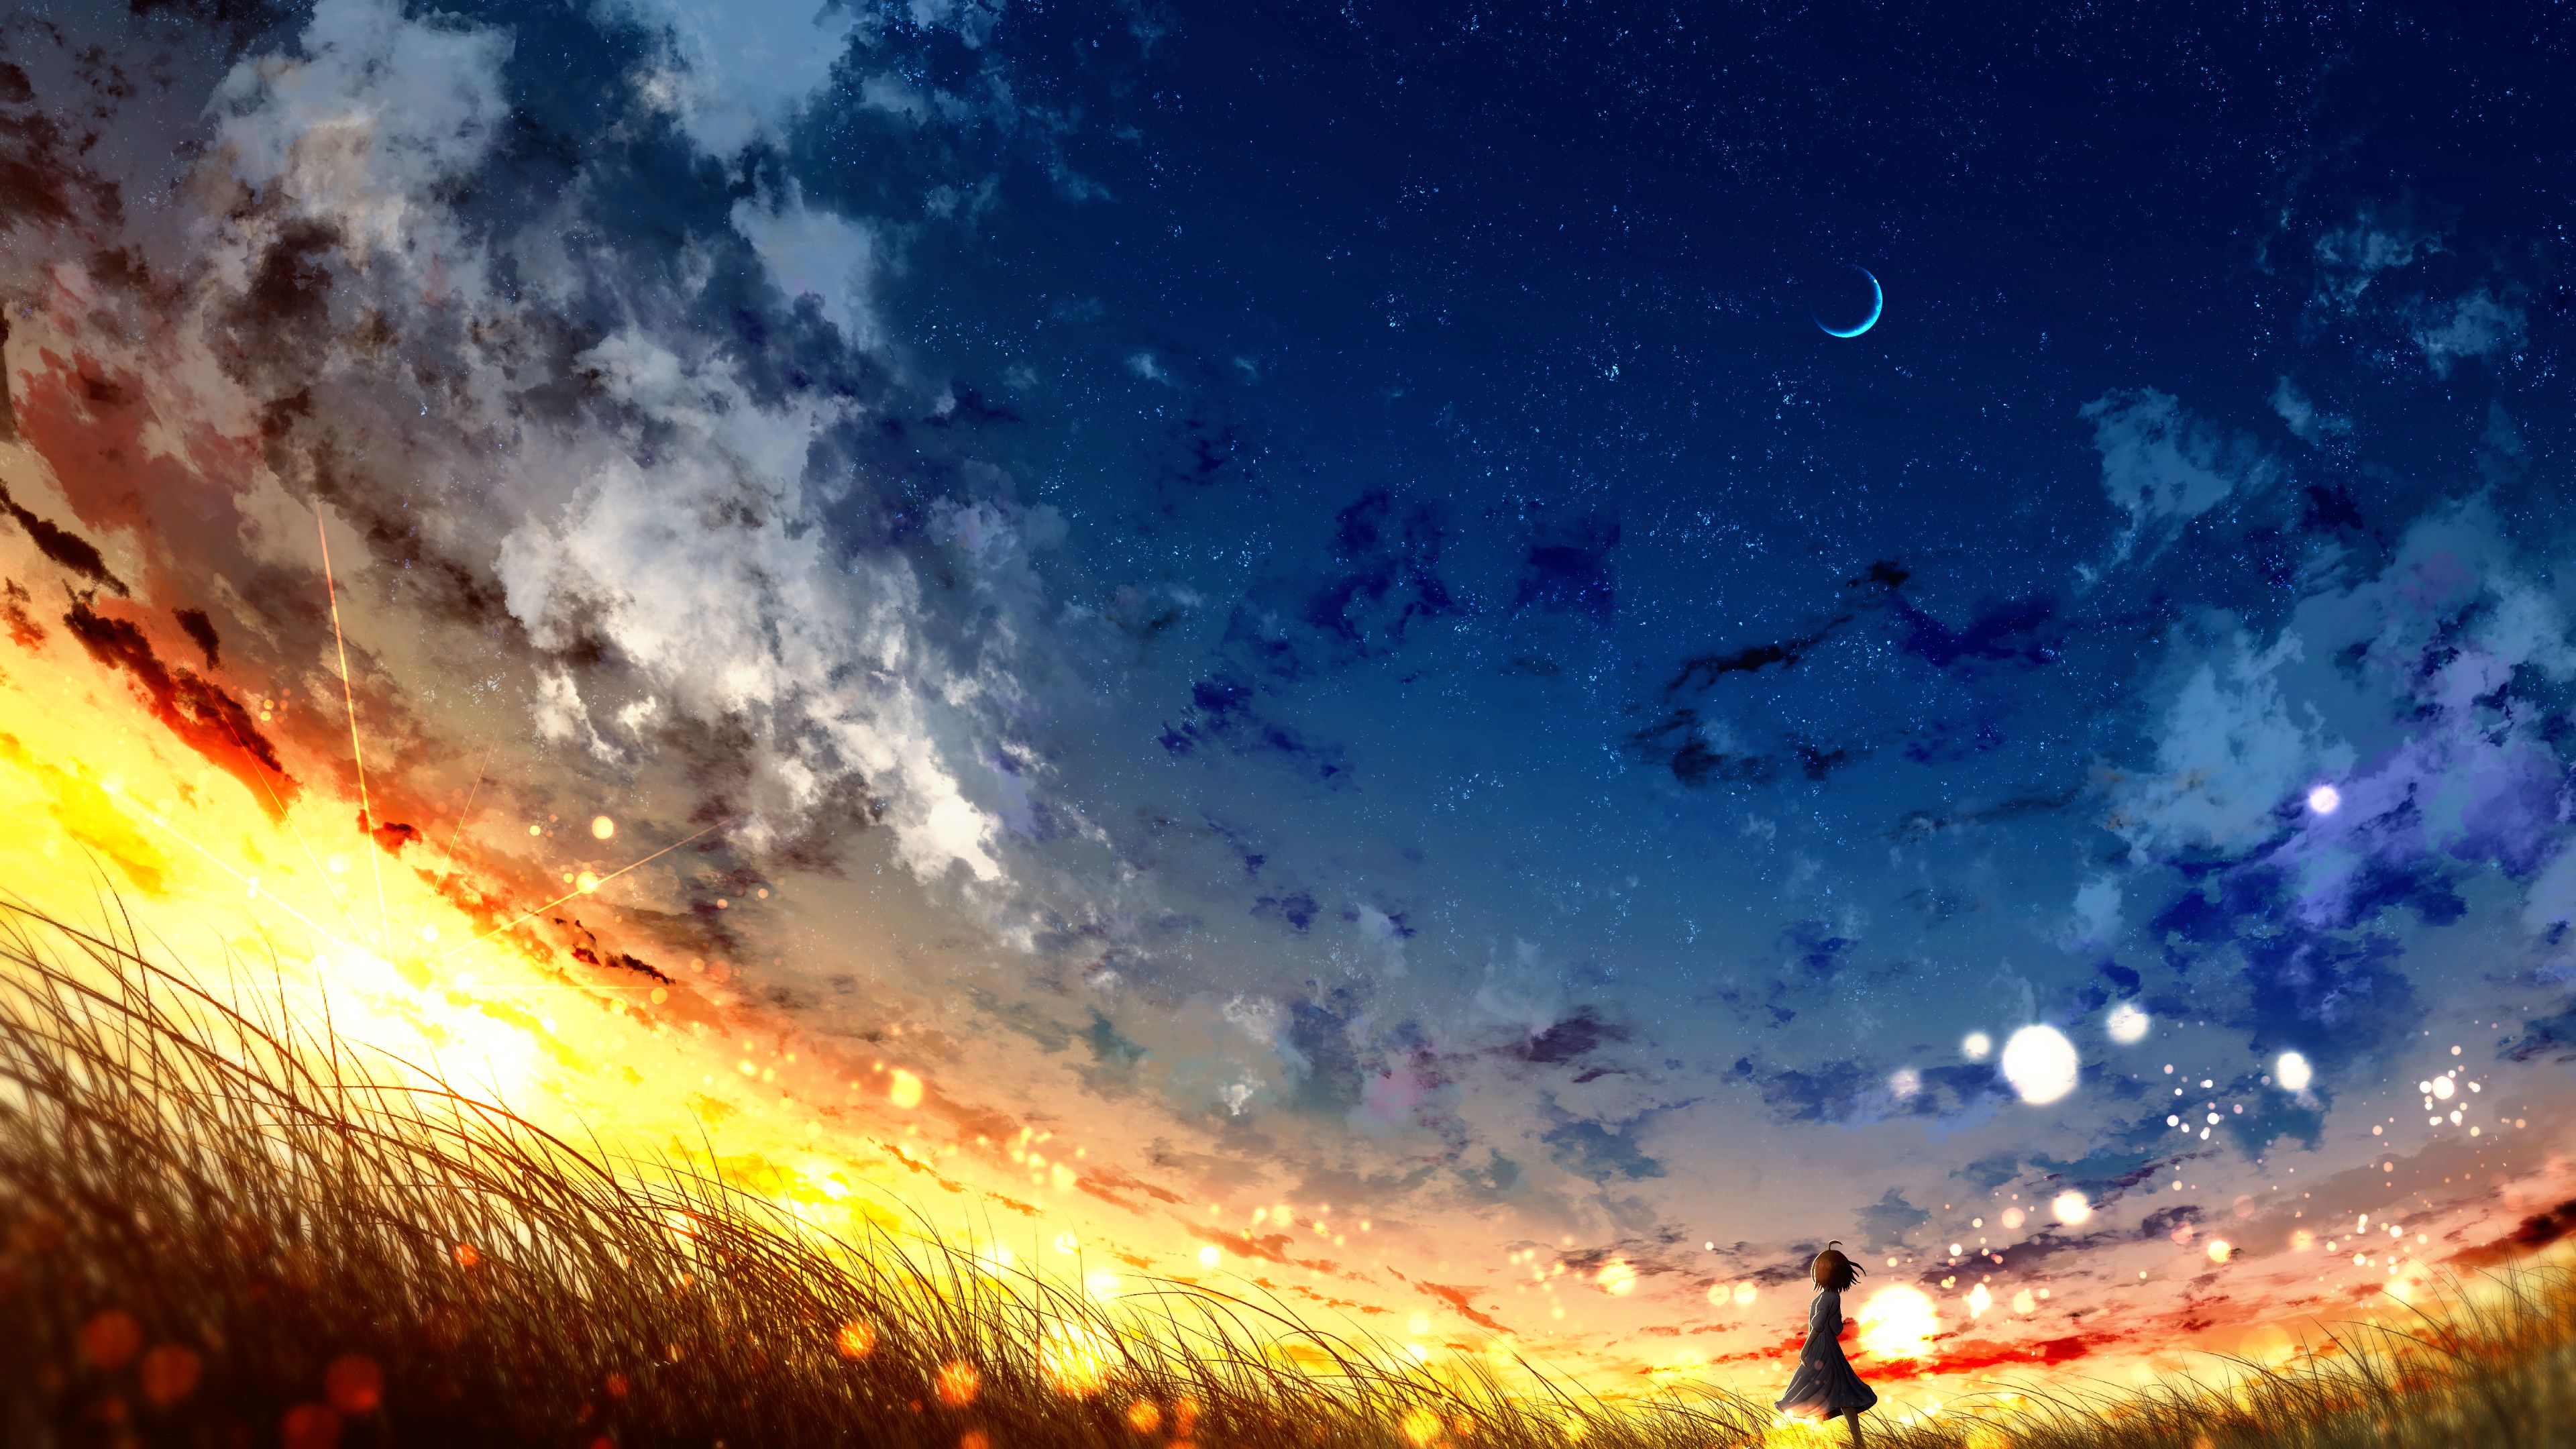 New Lock Screen Wallpapers art, girl, loneliness, night, moon, alone, lonely